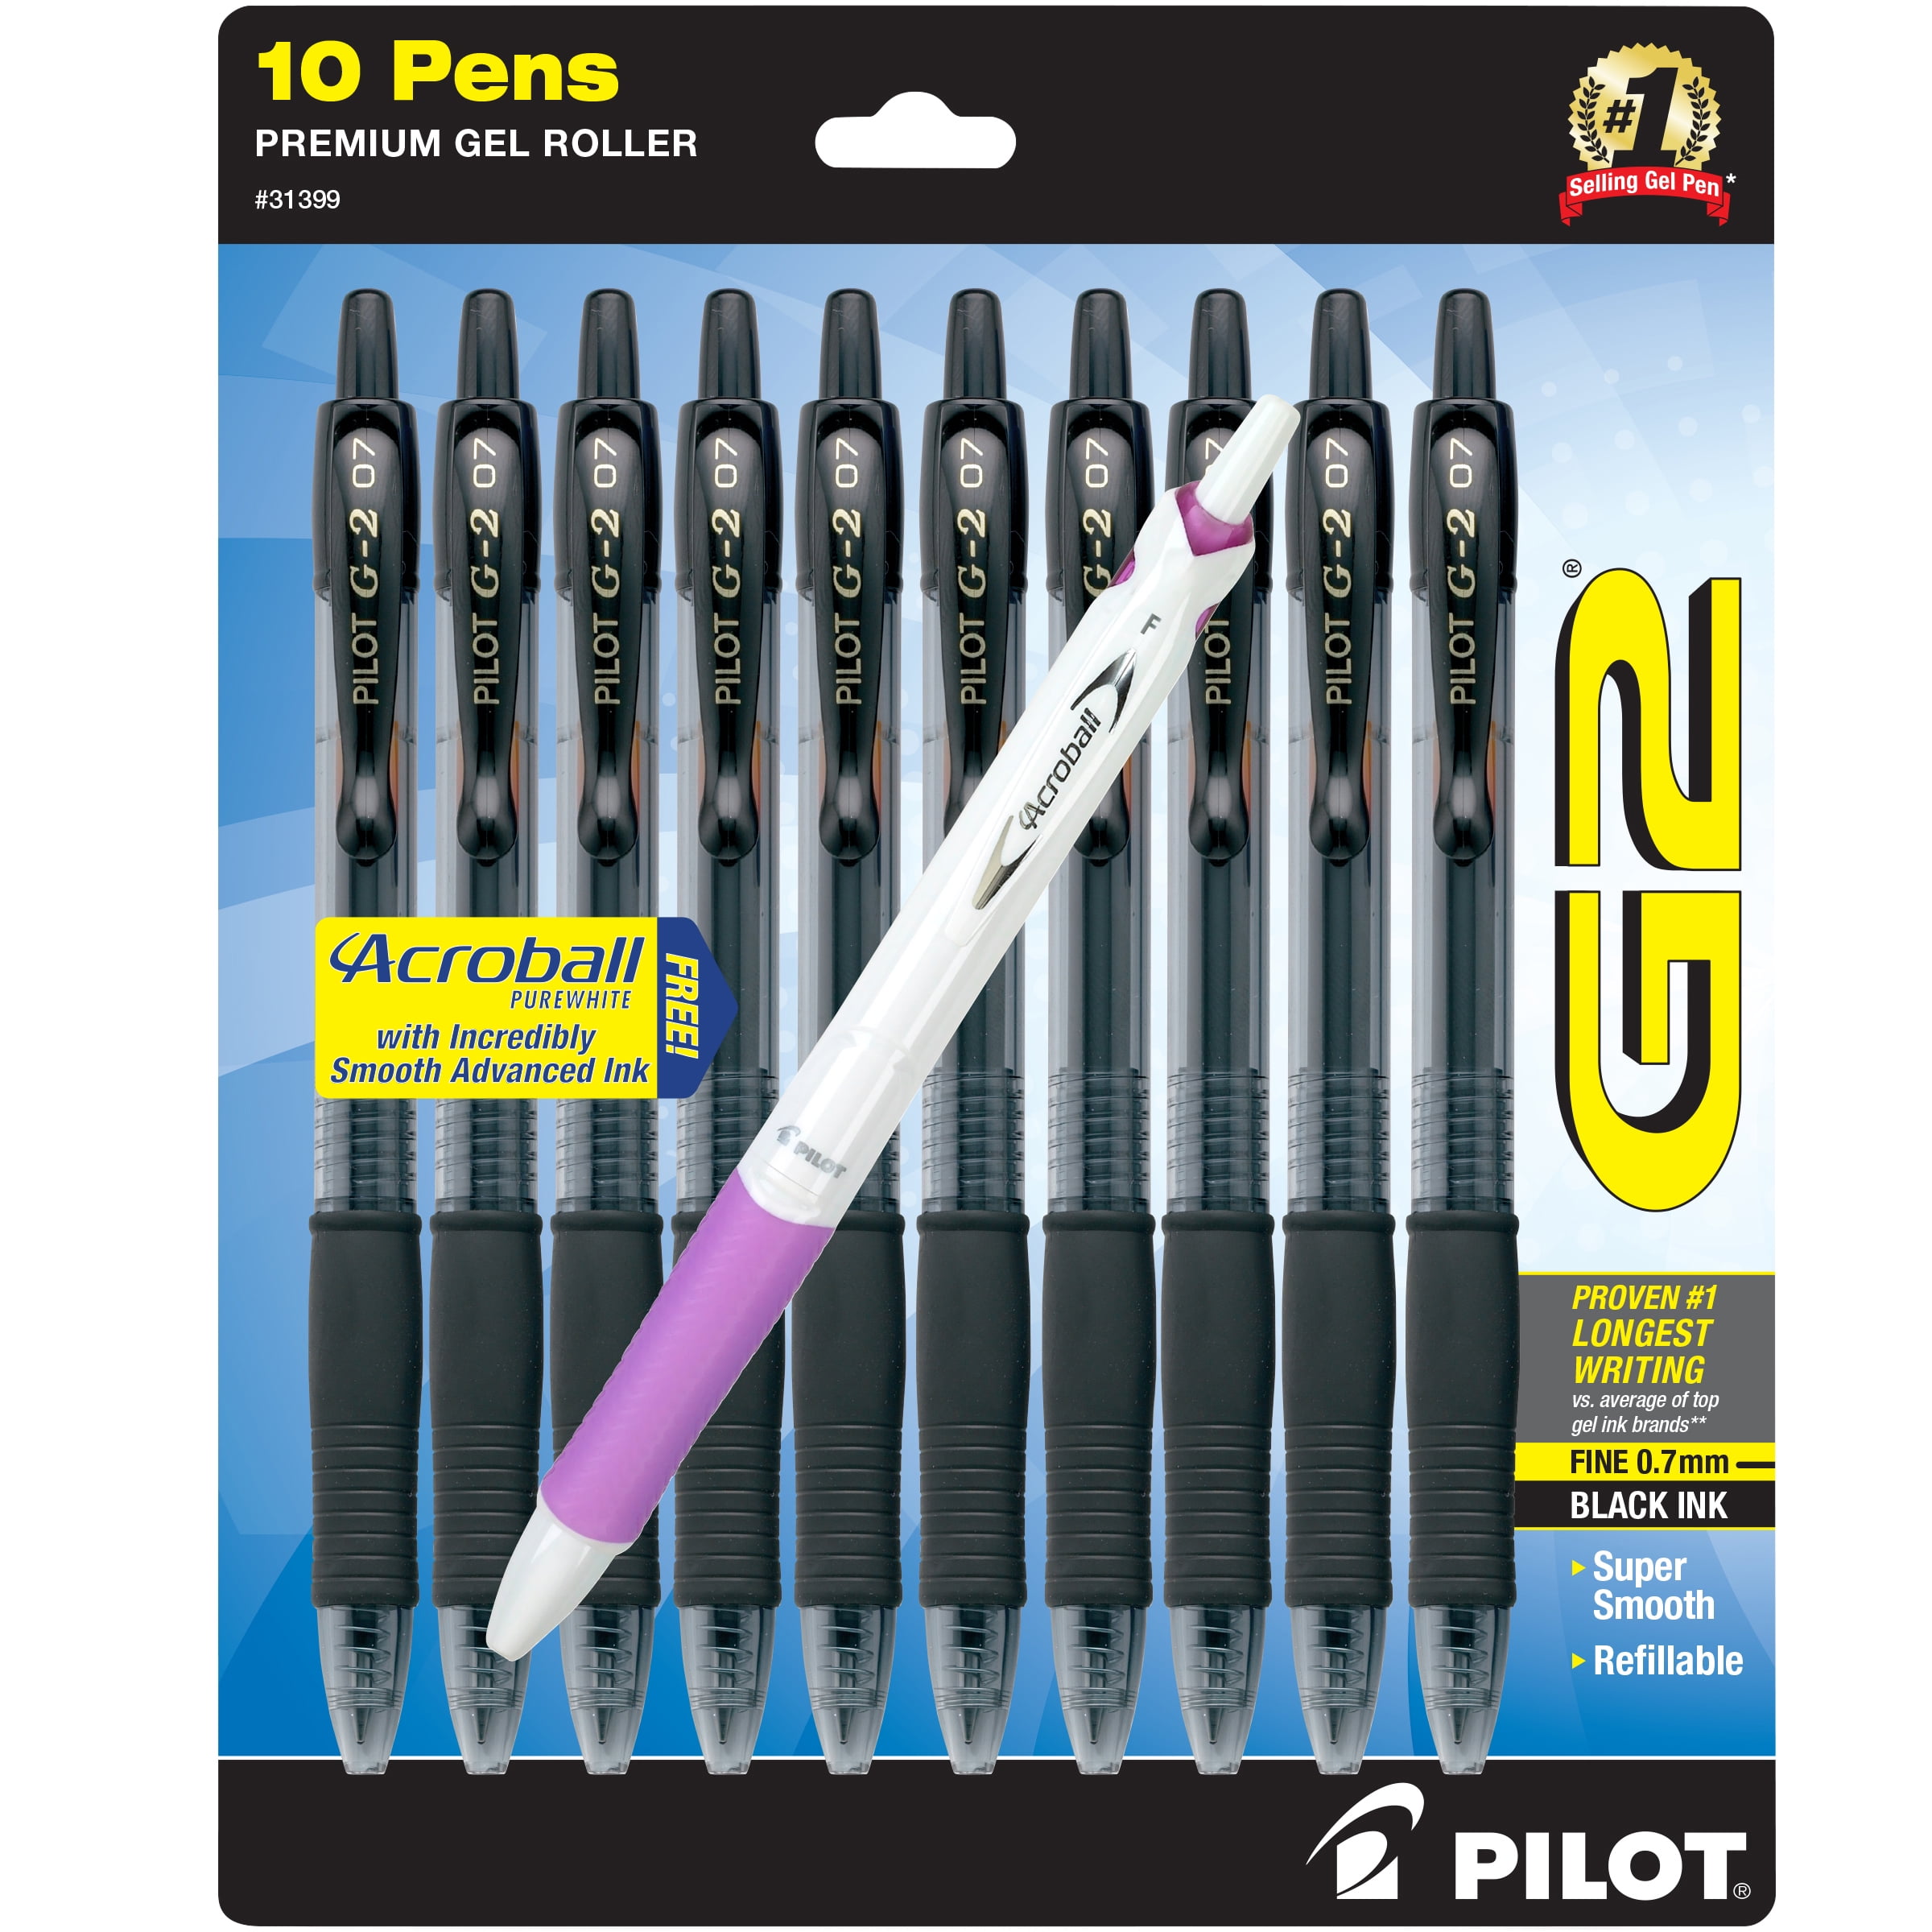 100 Best Pens: Gel, Ballpoint, Rollerball, and More, 2021